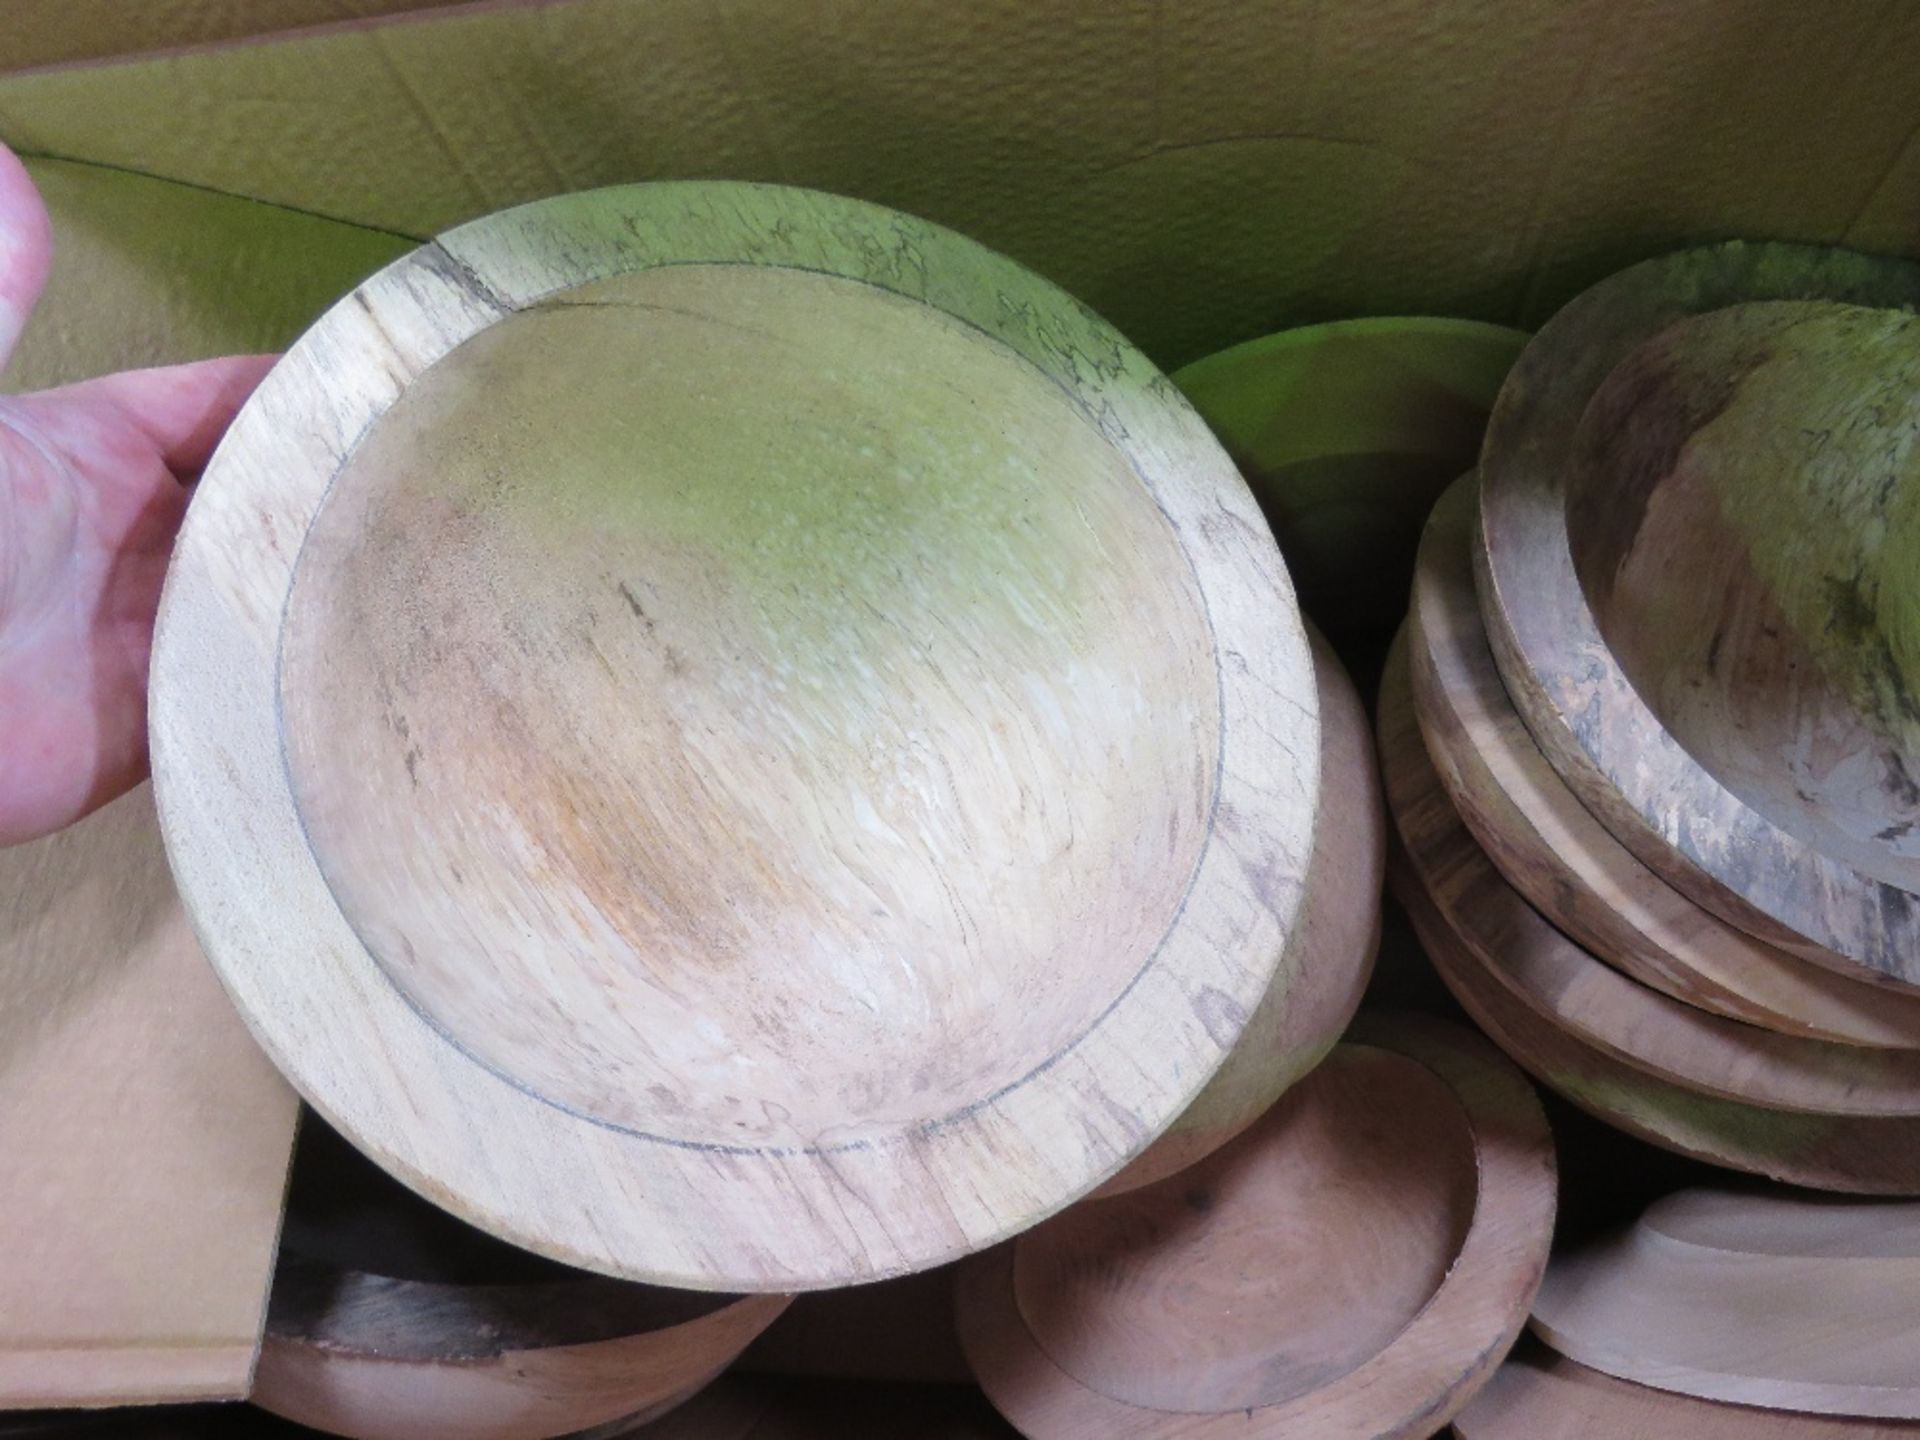 2 X BOXES CONTAINING TURNED WOODEN BOWL BLANKS. OWNER NO LONGER HAS THE TIME TO FINISH THEM. THI - Image 3 of 3